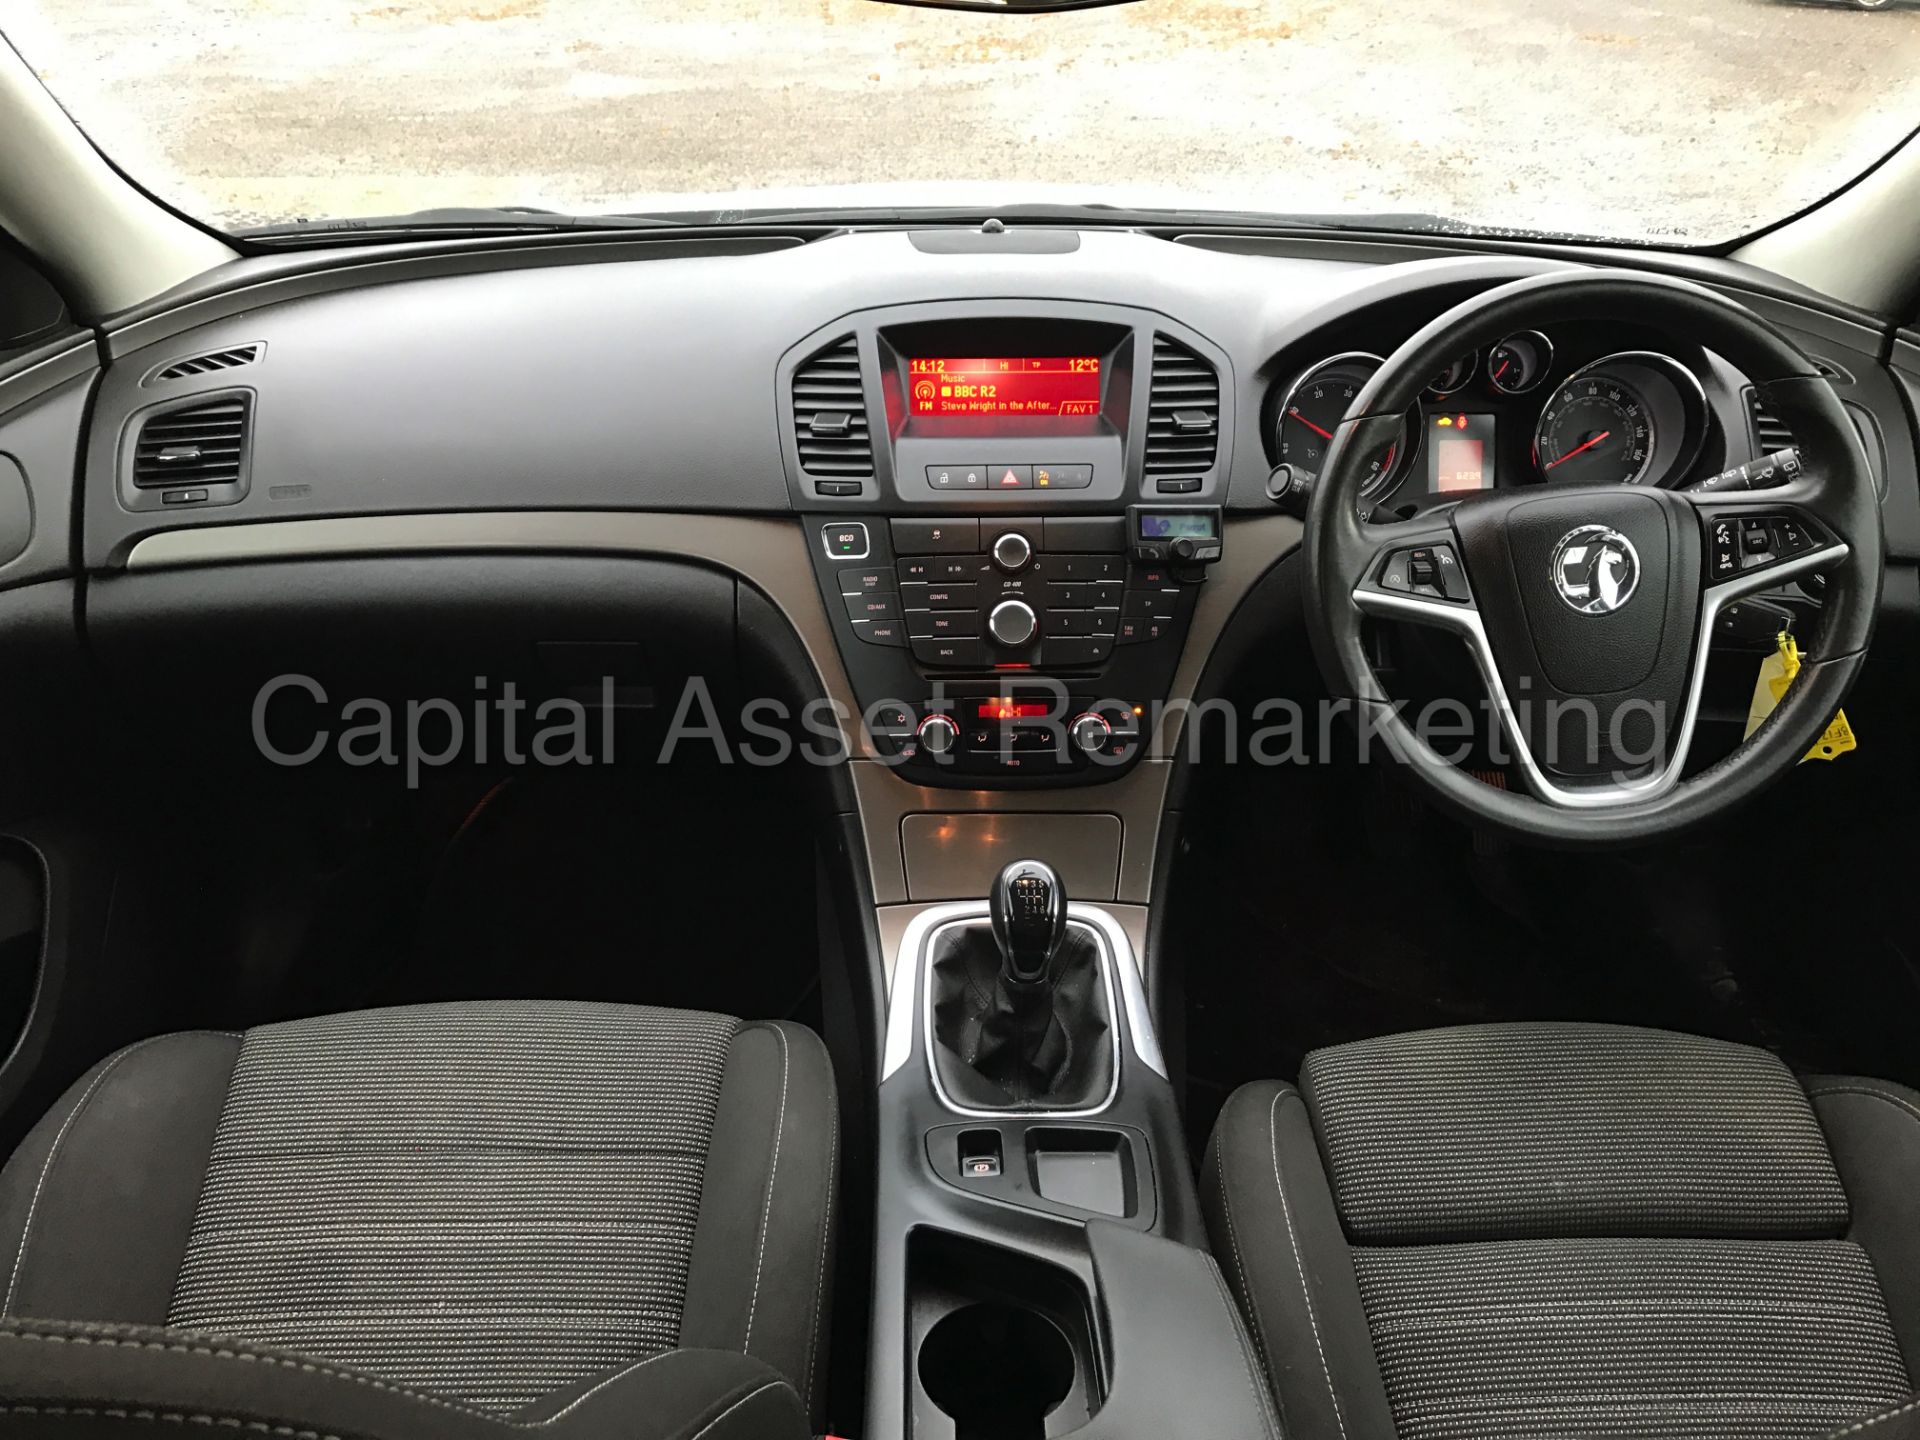 VAUXHALL INSIGNIA 'EXCLUSIVE' (2012) '2.0 CDTI - 6 SPEED - STOP/START - AIR CON' *1 FORMER KEEPER* - Image 17 of 26